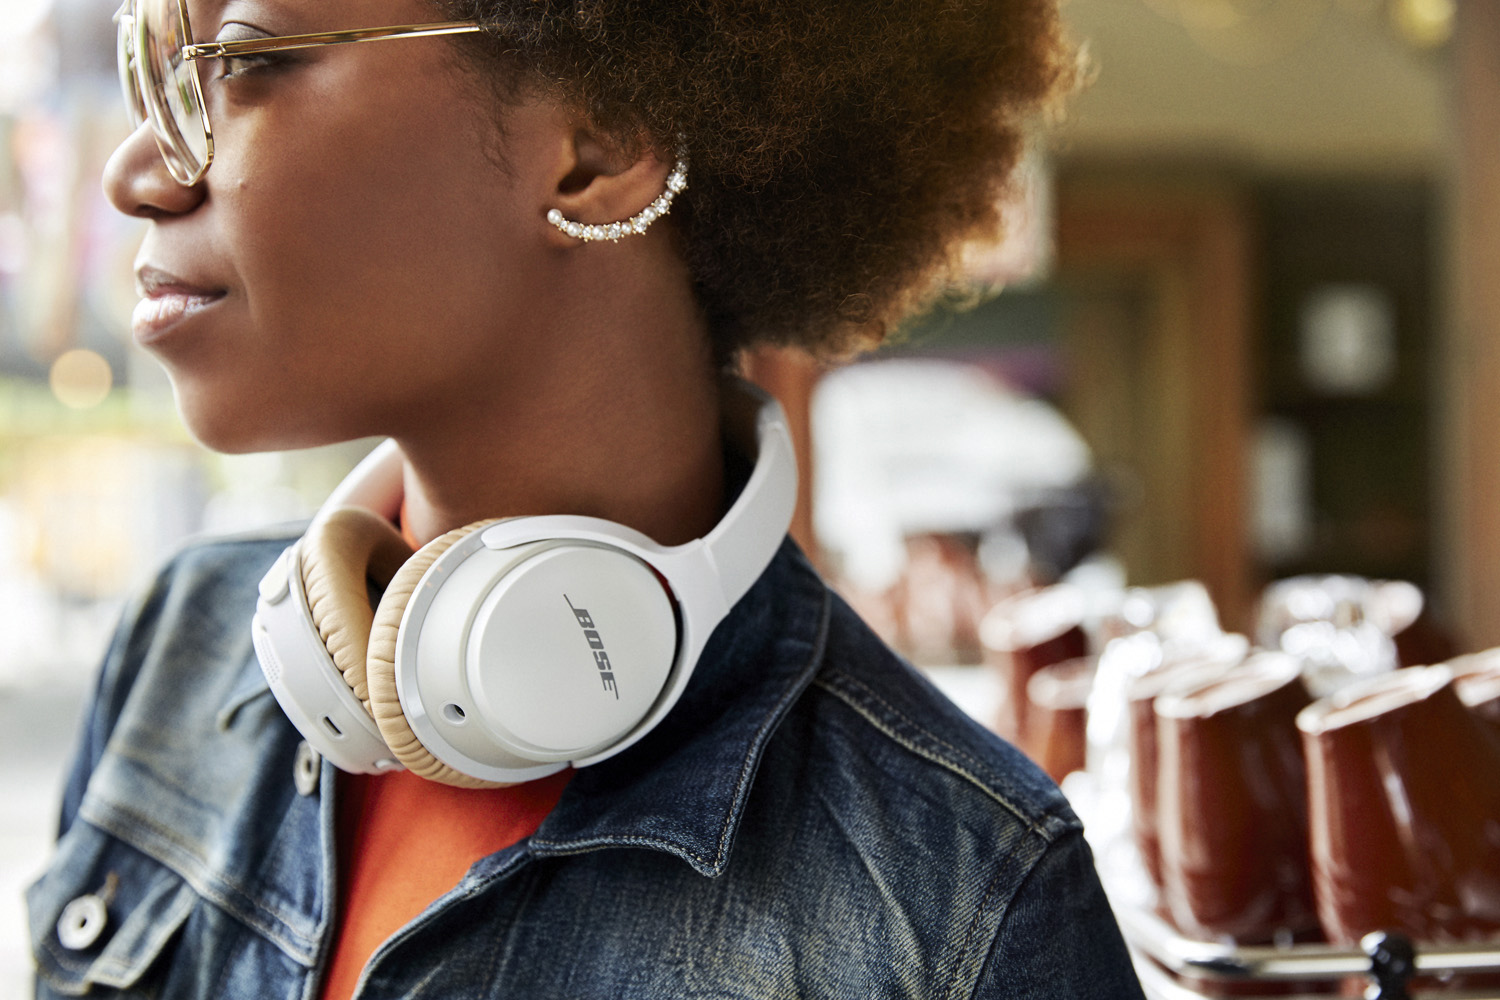 Bose Ear Headphones Review. Does Soundlink AE2 Live Up To The Hype? - TECH REVIEWS